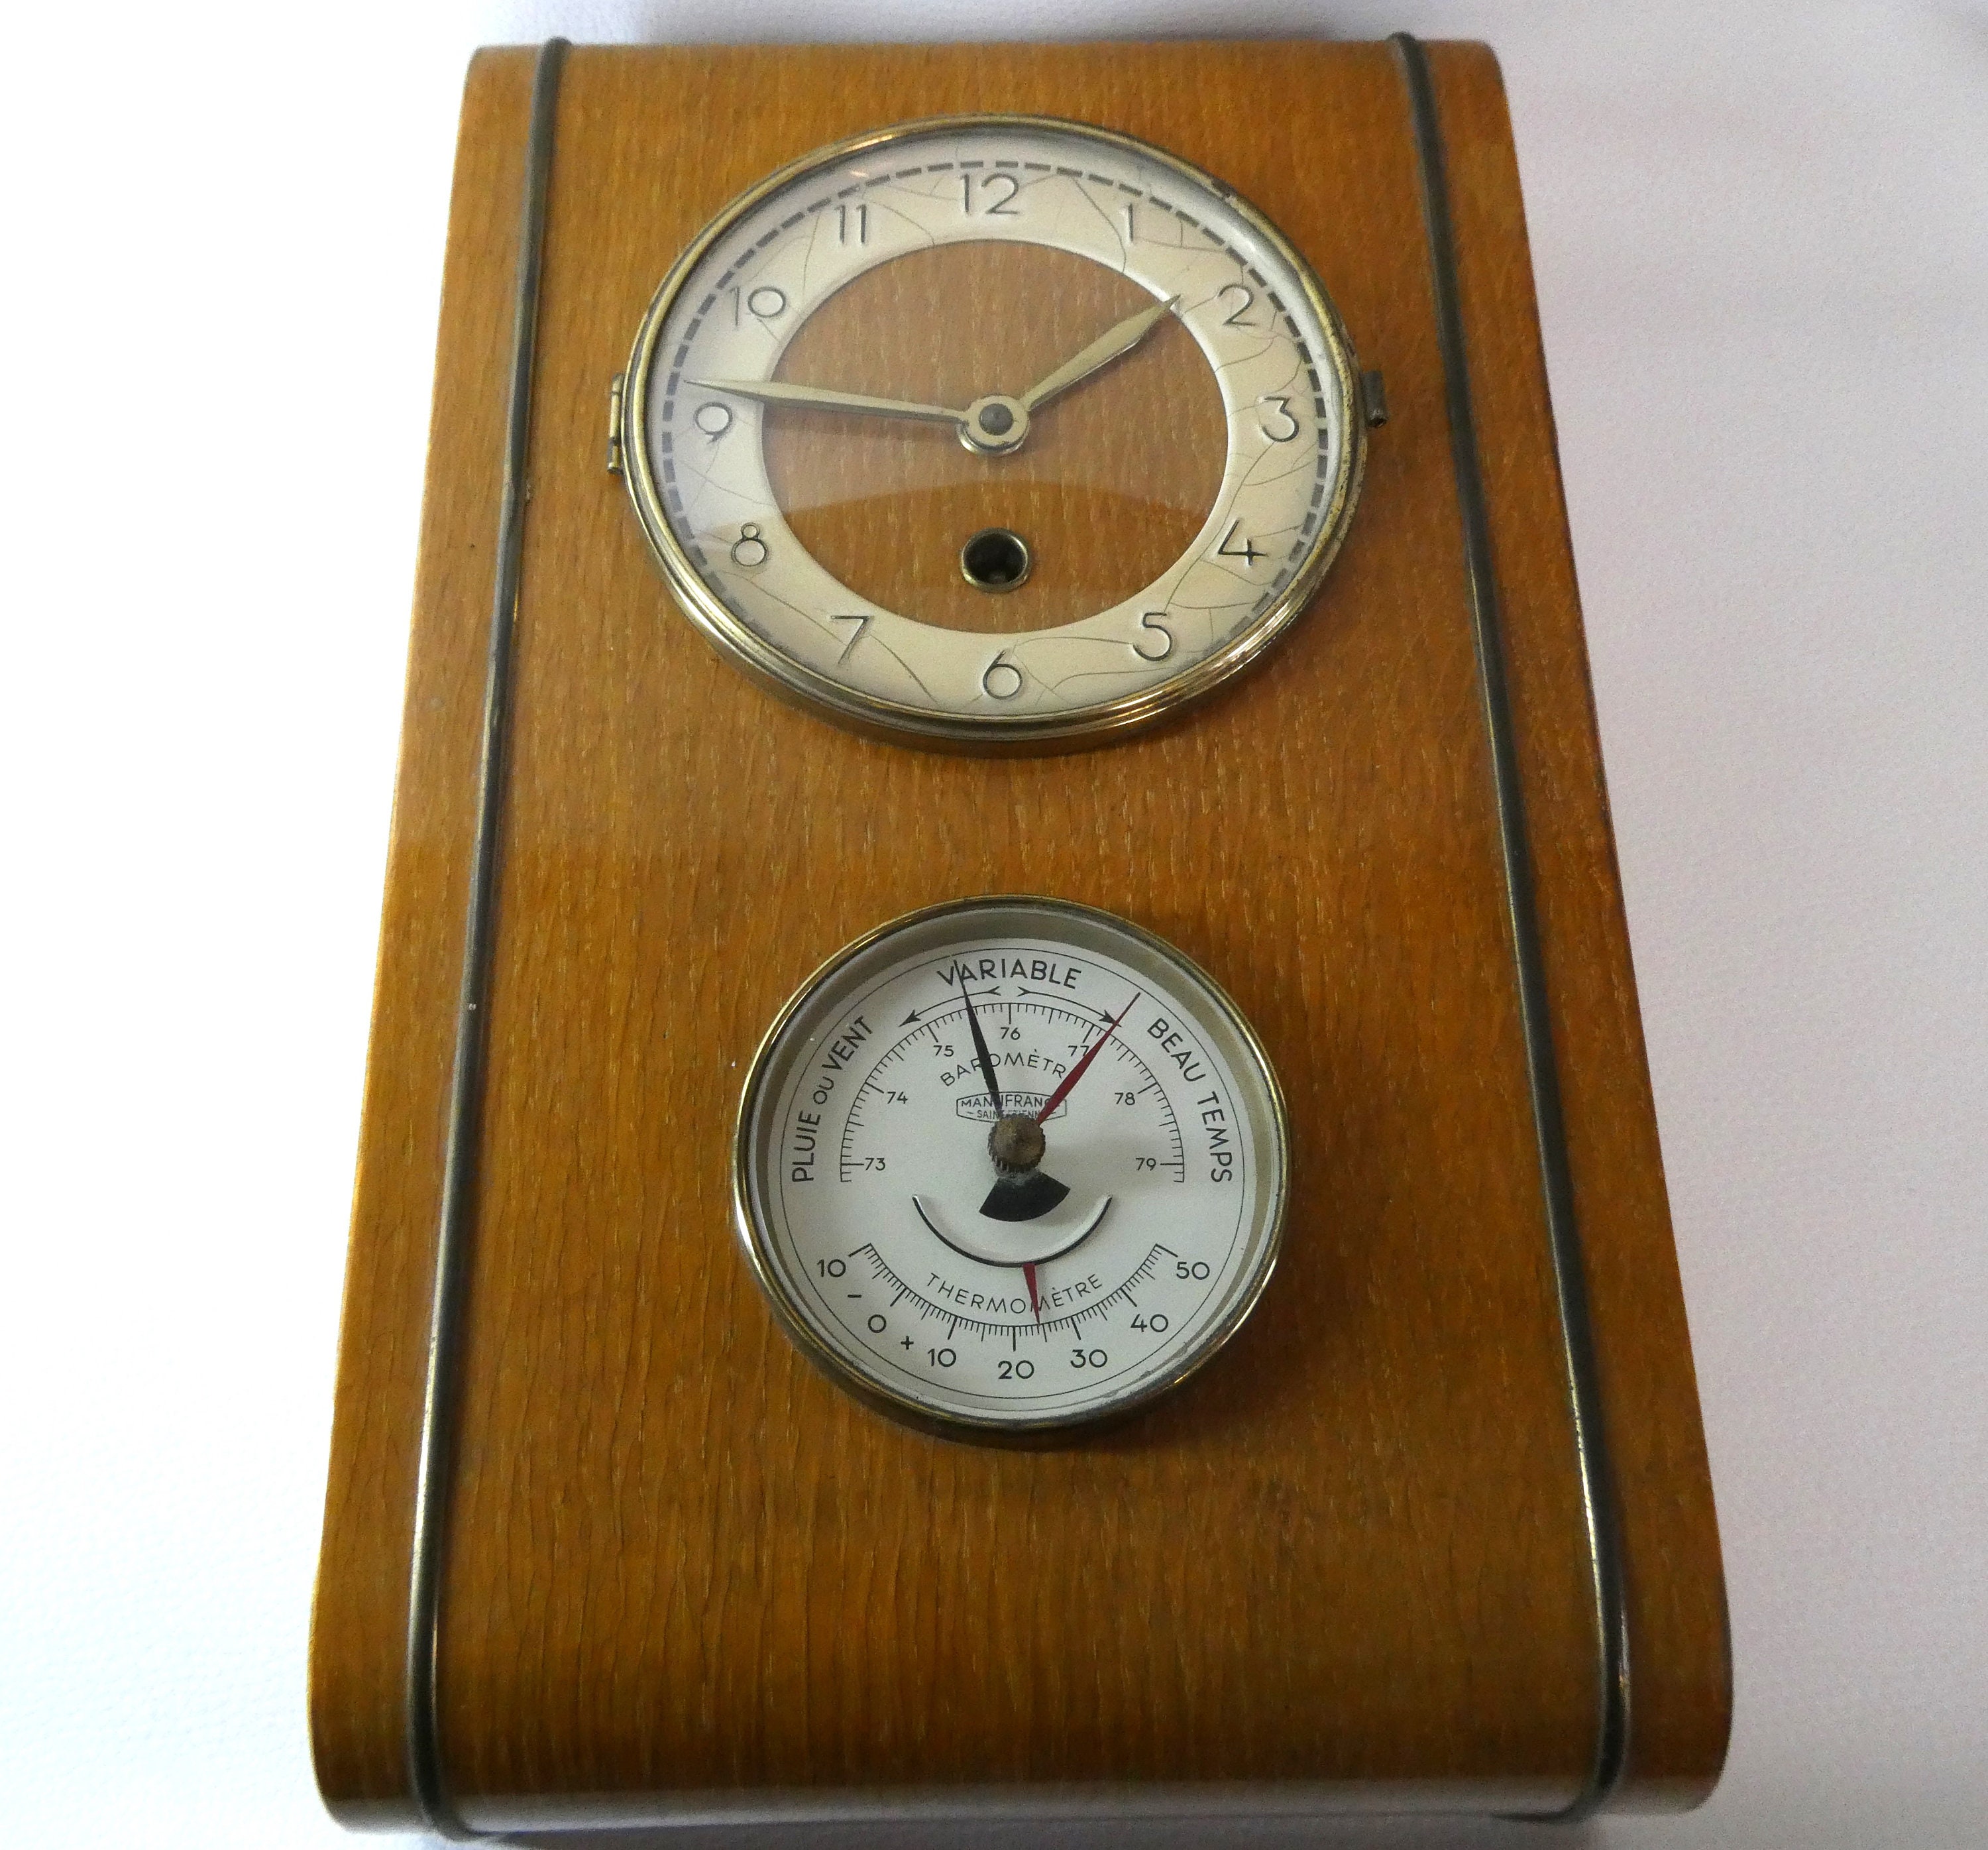 1940s Jaeger Desk Top Barometer and Thermometer